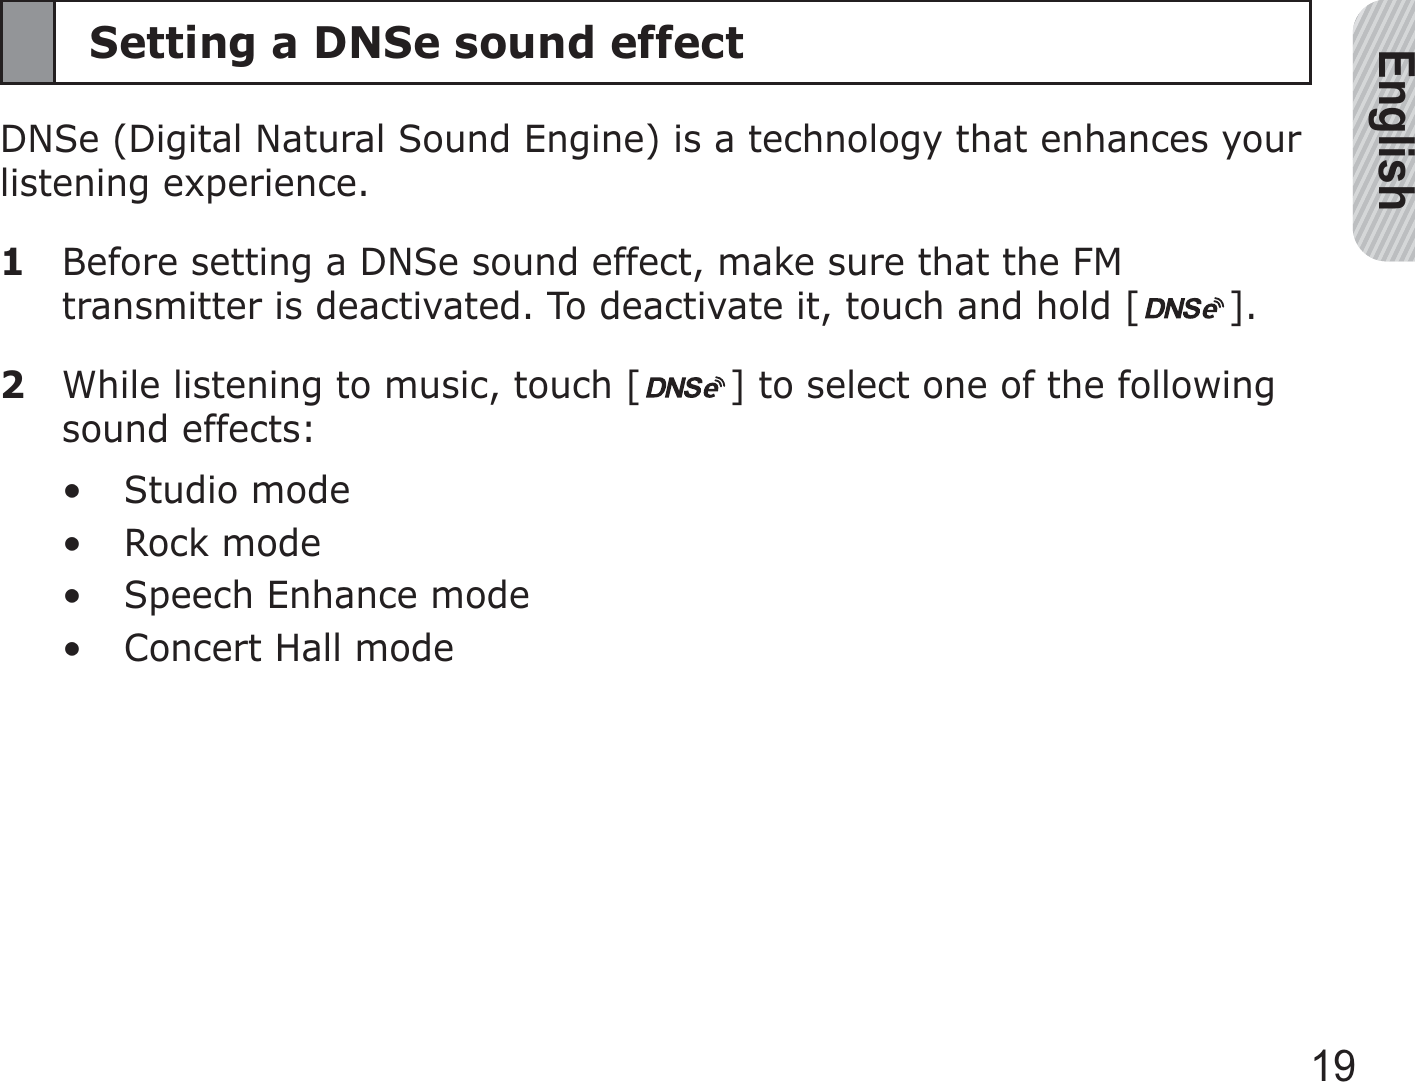 English19Setting a DNSe sound effectDNSe (Digital Natural Sound Engine) is a technology that enhances your listening experience.1  Before setting a DNSe sound effect, make sure that the FM transmitter is deactivated. To deactivate it, touch and hold [ ].2  While listening to music, touch [ ] to select one of the following sound effects:Studio modeRock modeSpeech Enhance modeConcert Hall mode••••